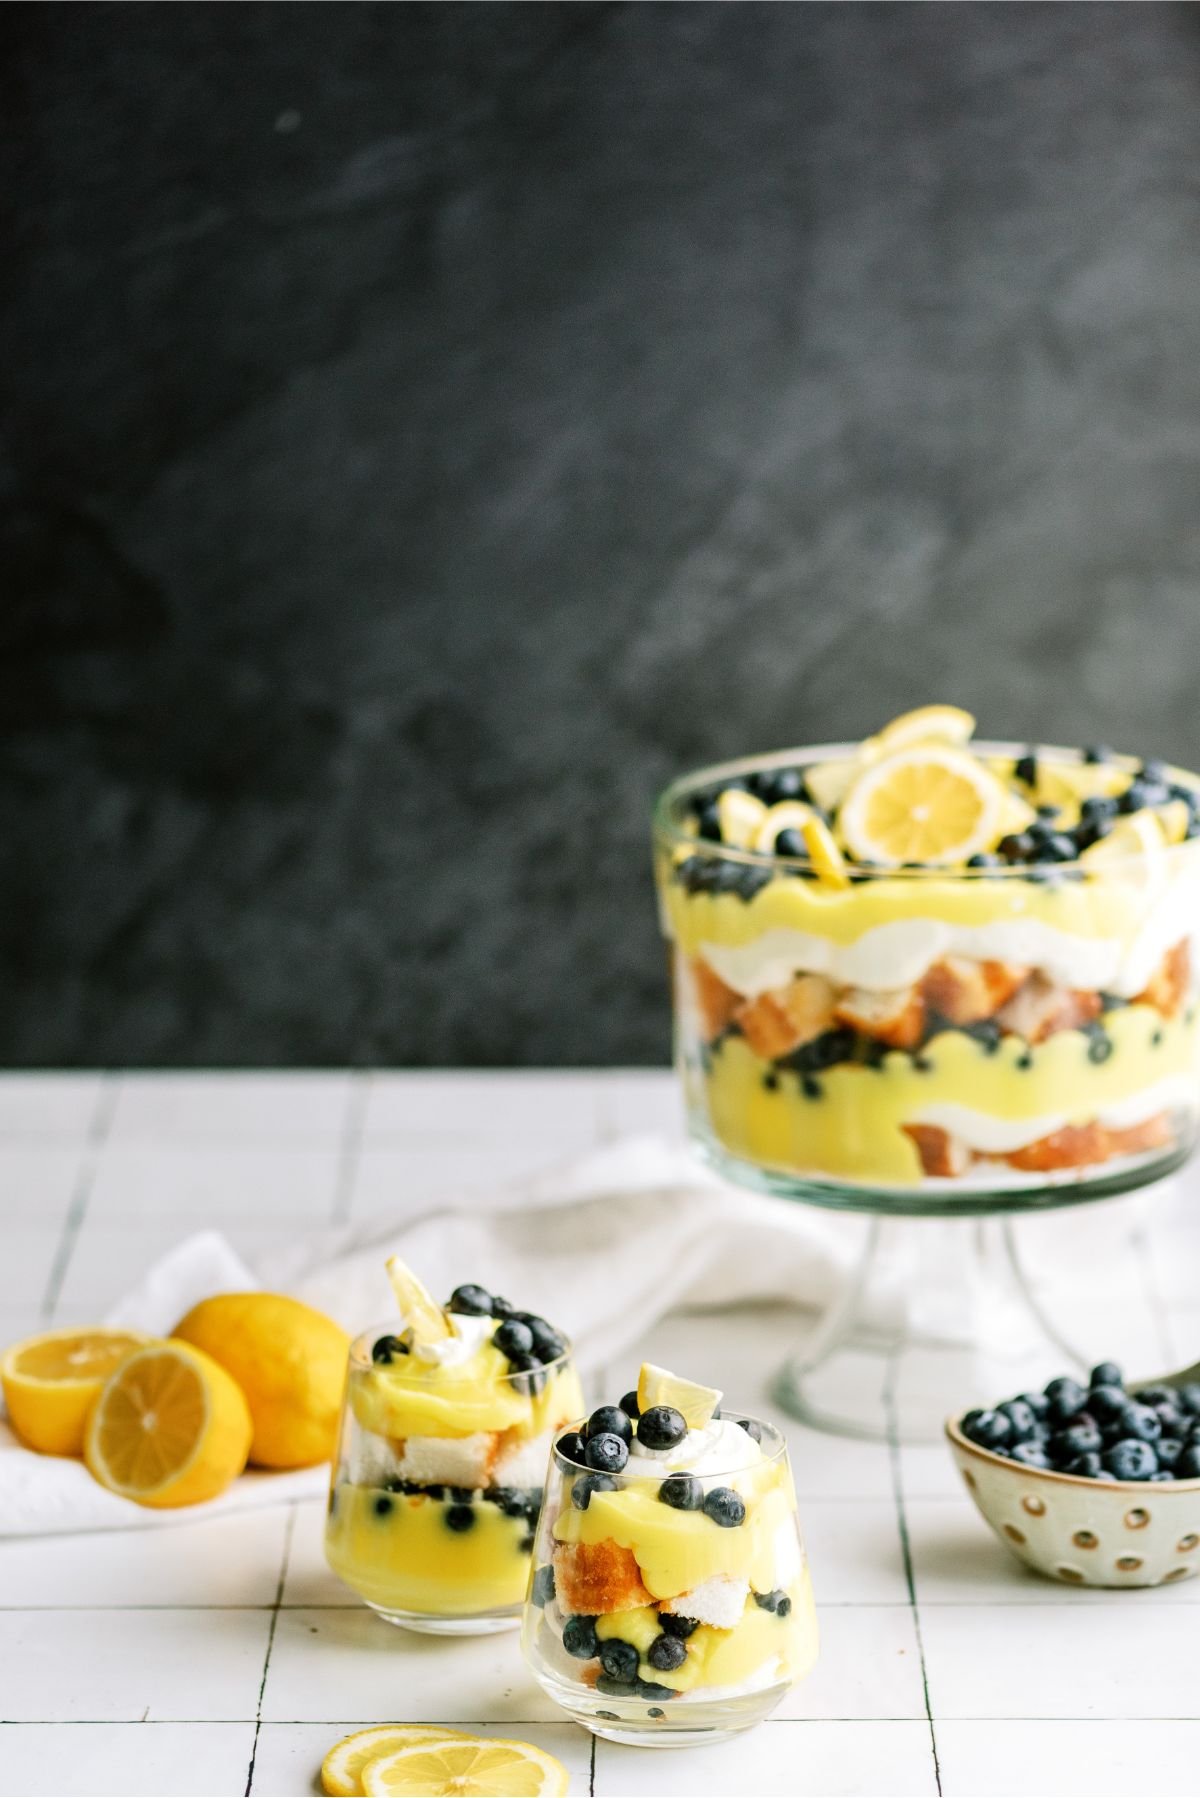 Lemon Blueberry Trifle with two cups containing individual servings